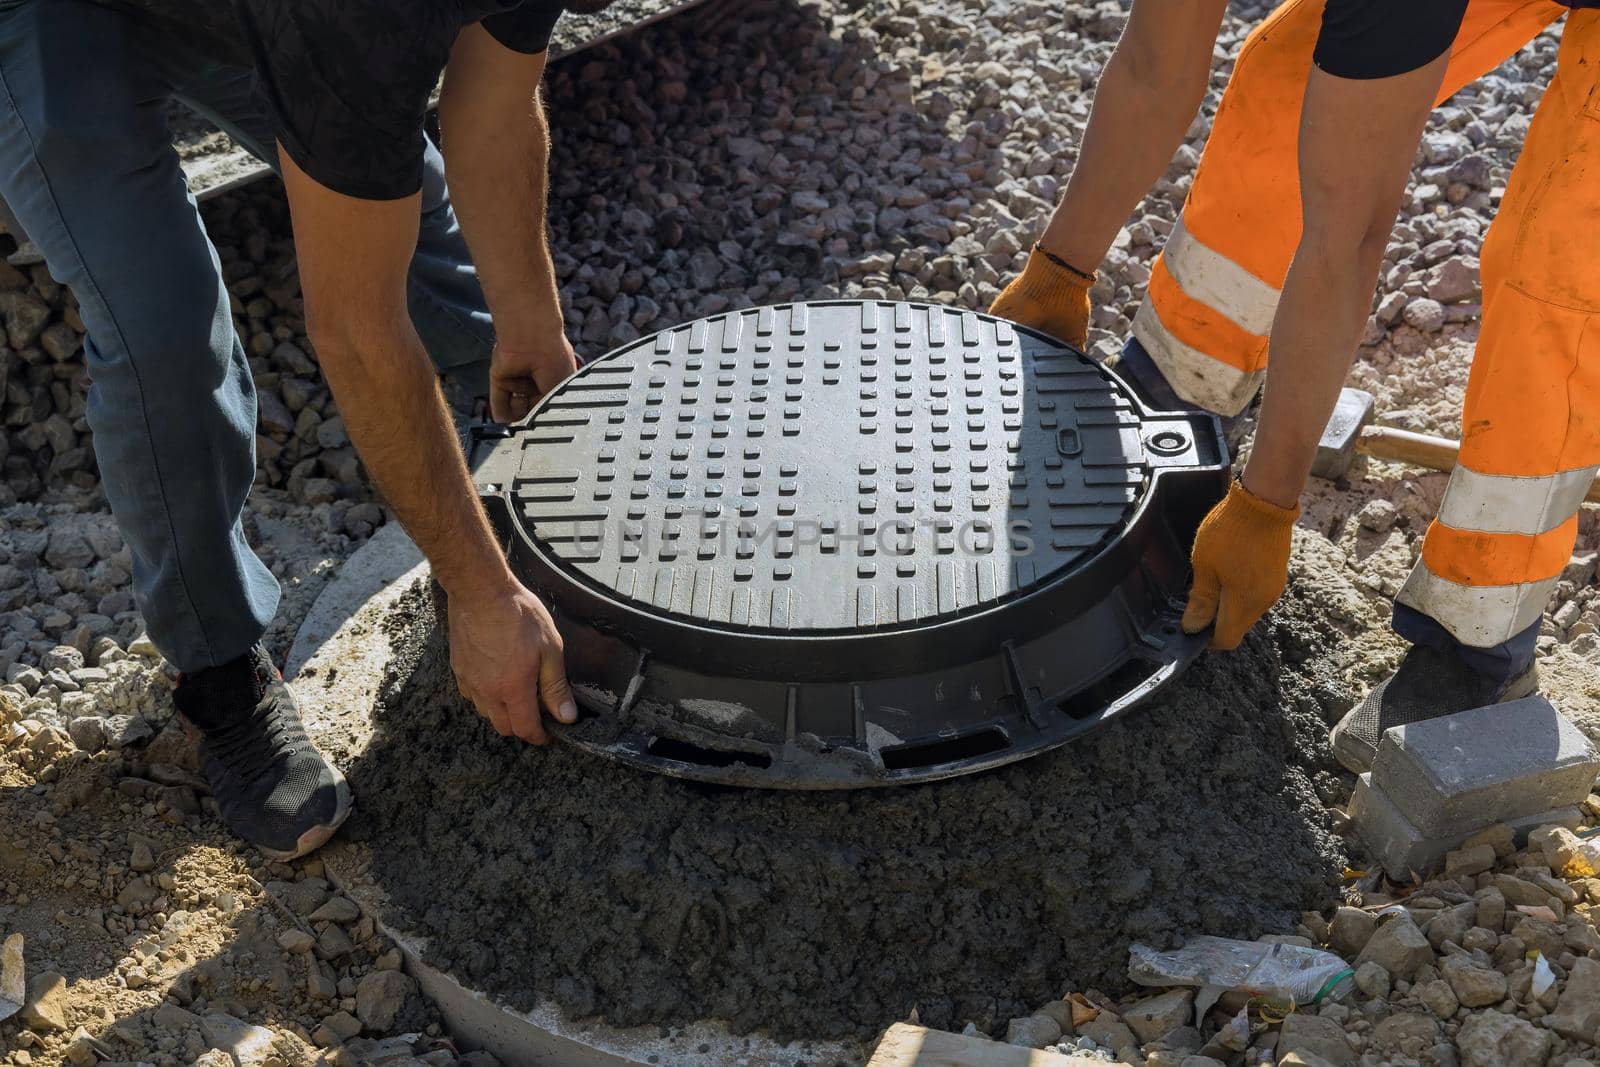 A worker installs a sewer manhole on a septic tank made of concrete rings by ungvar